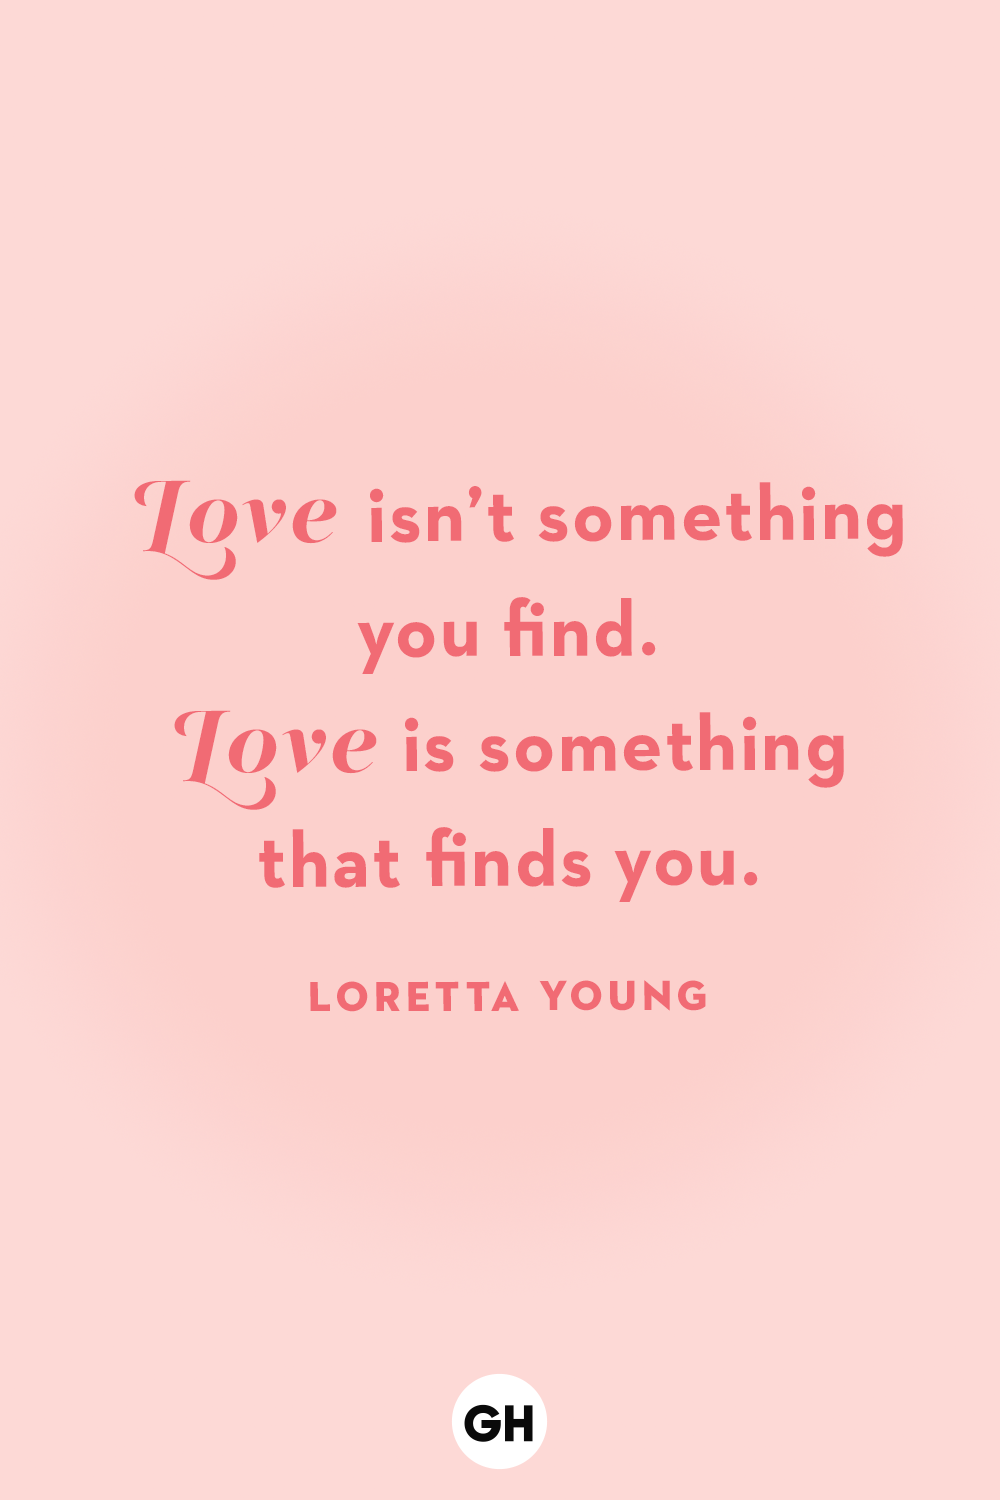 Quotes On Love With Images - Hadria Jaquenette